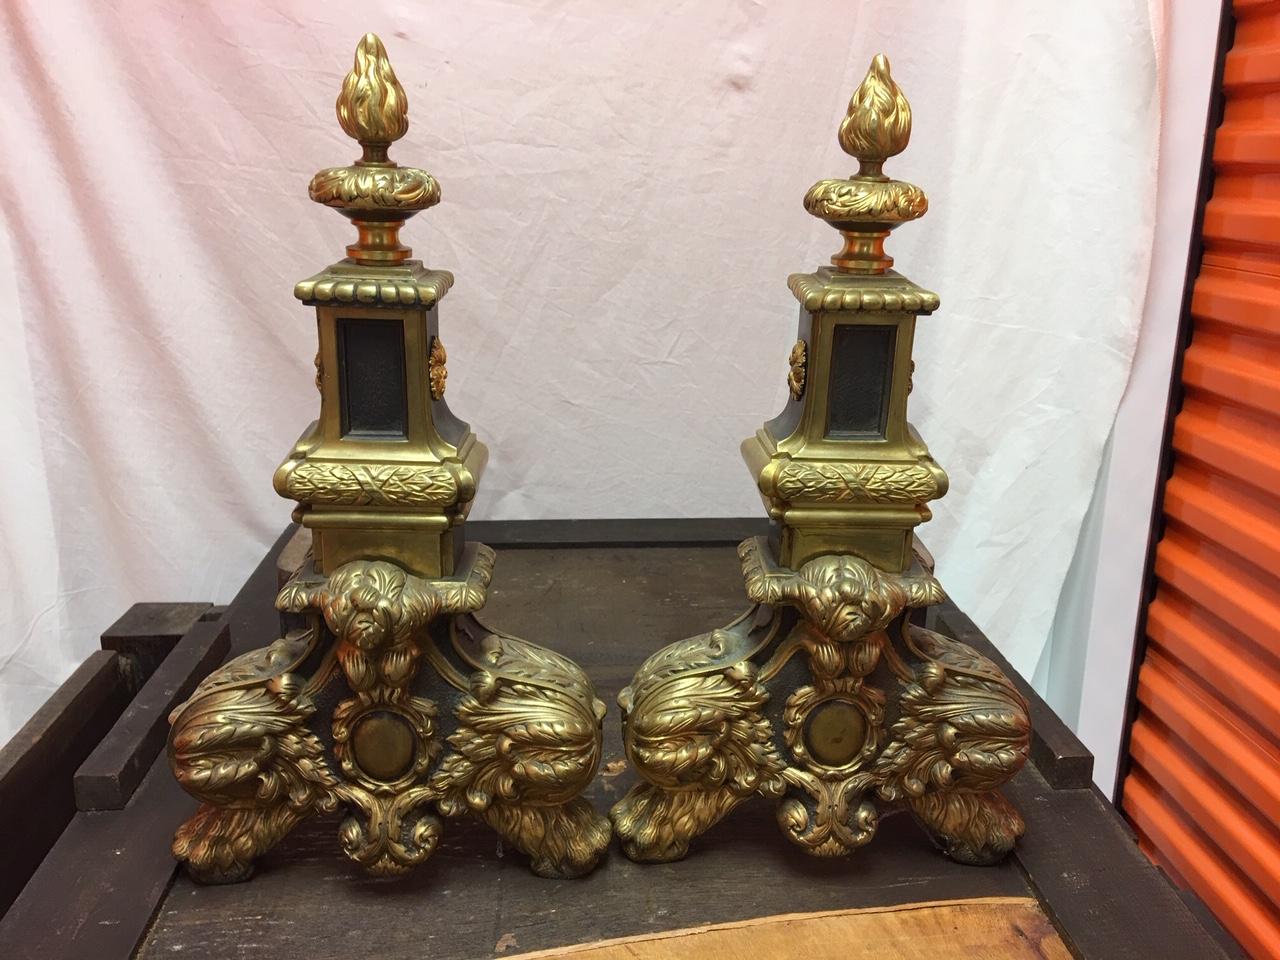 Pair of English brass black andirons with flame finials, 19th century.